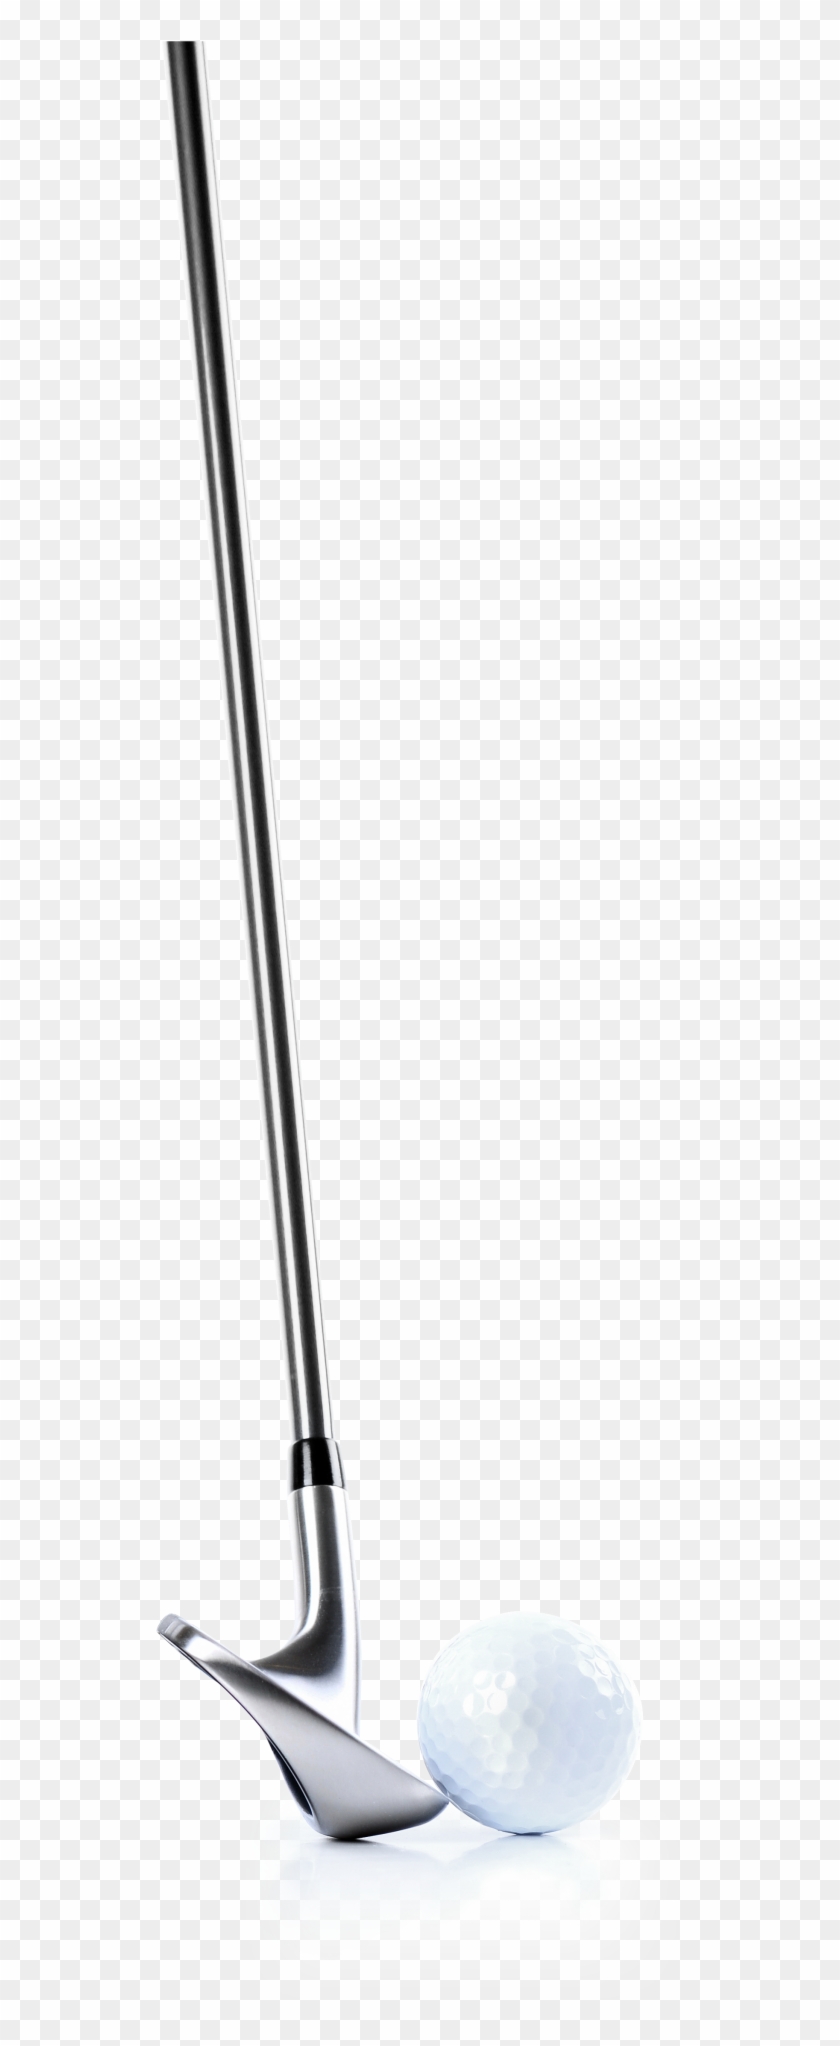 Golf Club - Pitching Wedge Clipart #713238